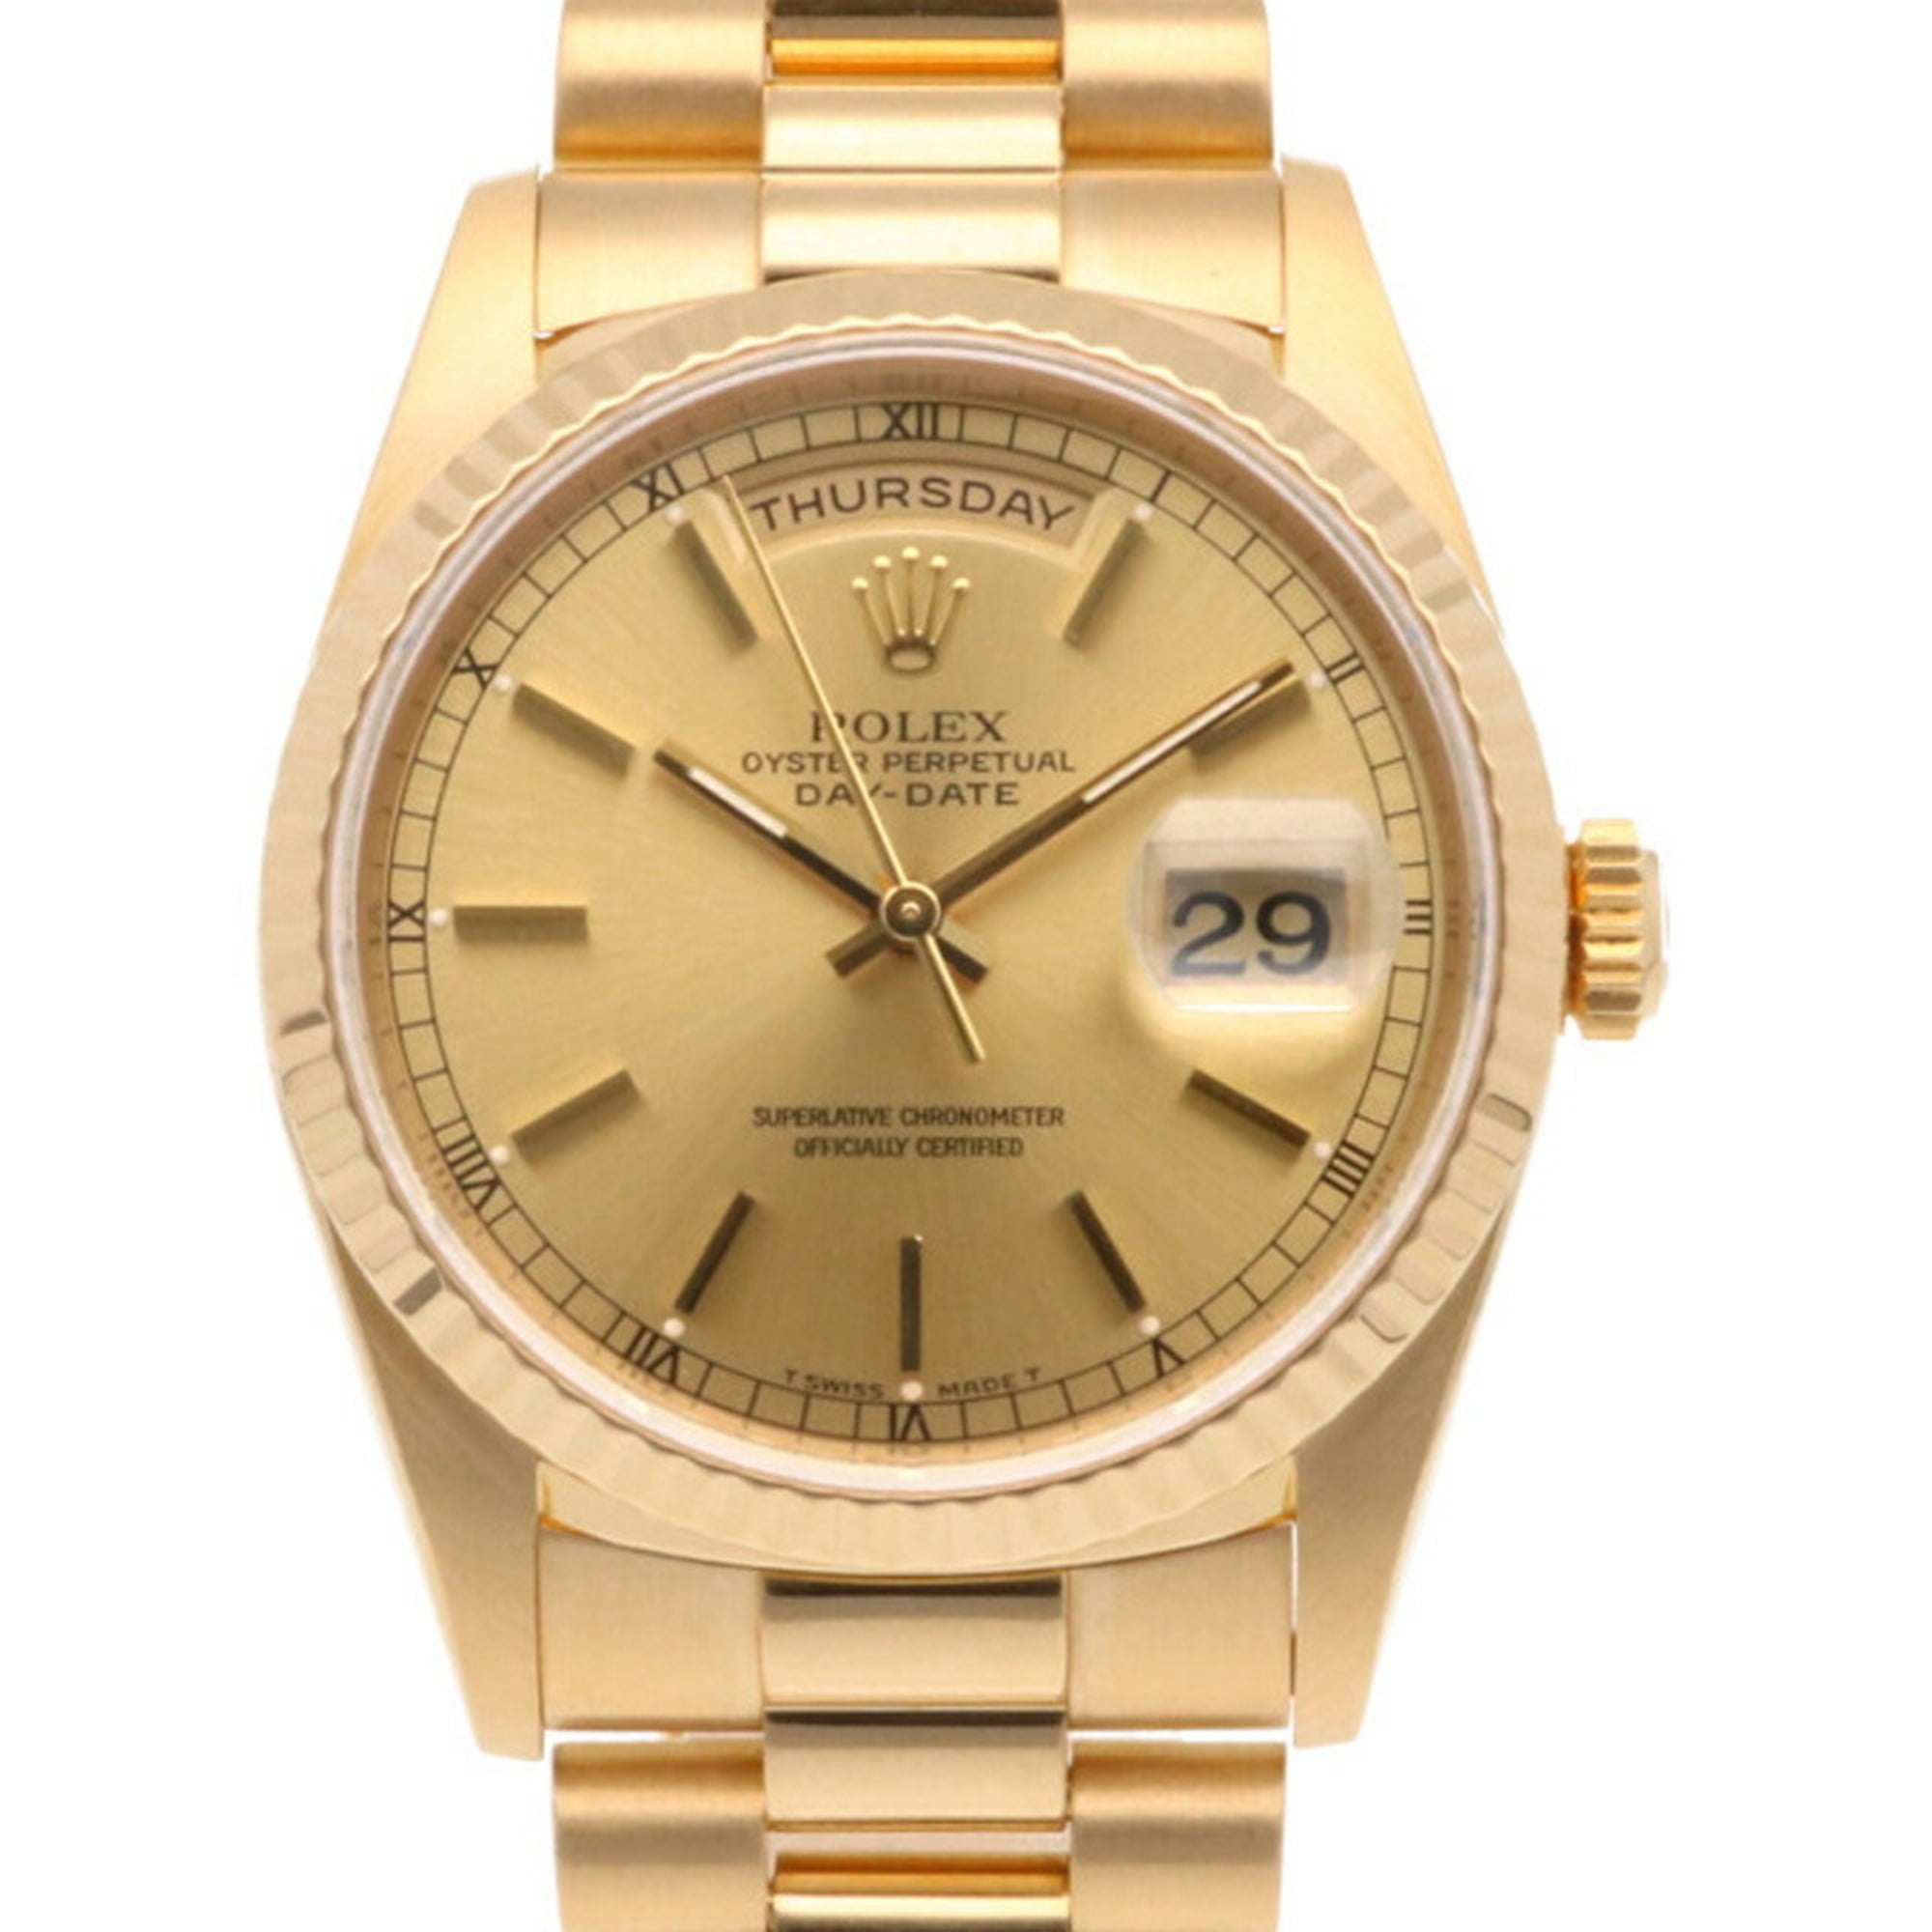 At passe lettelse Due Authenticated Used Rolex ROLEX day date oyster perpetual watch 18k gold K18  yellow 18238 unisex - Walmart.com